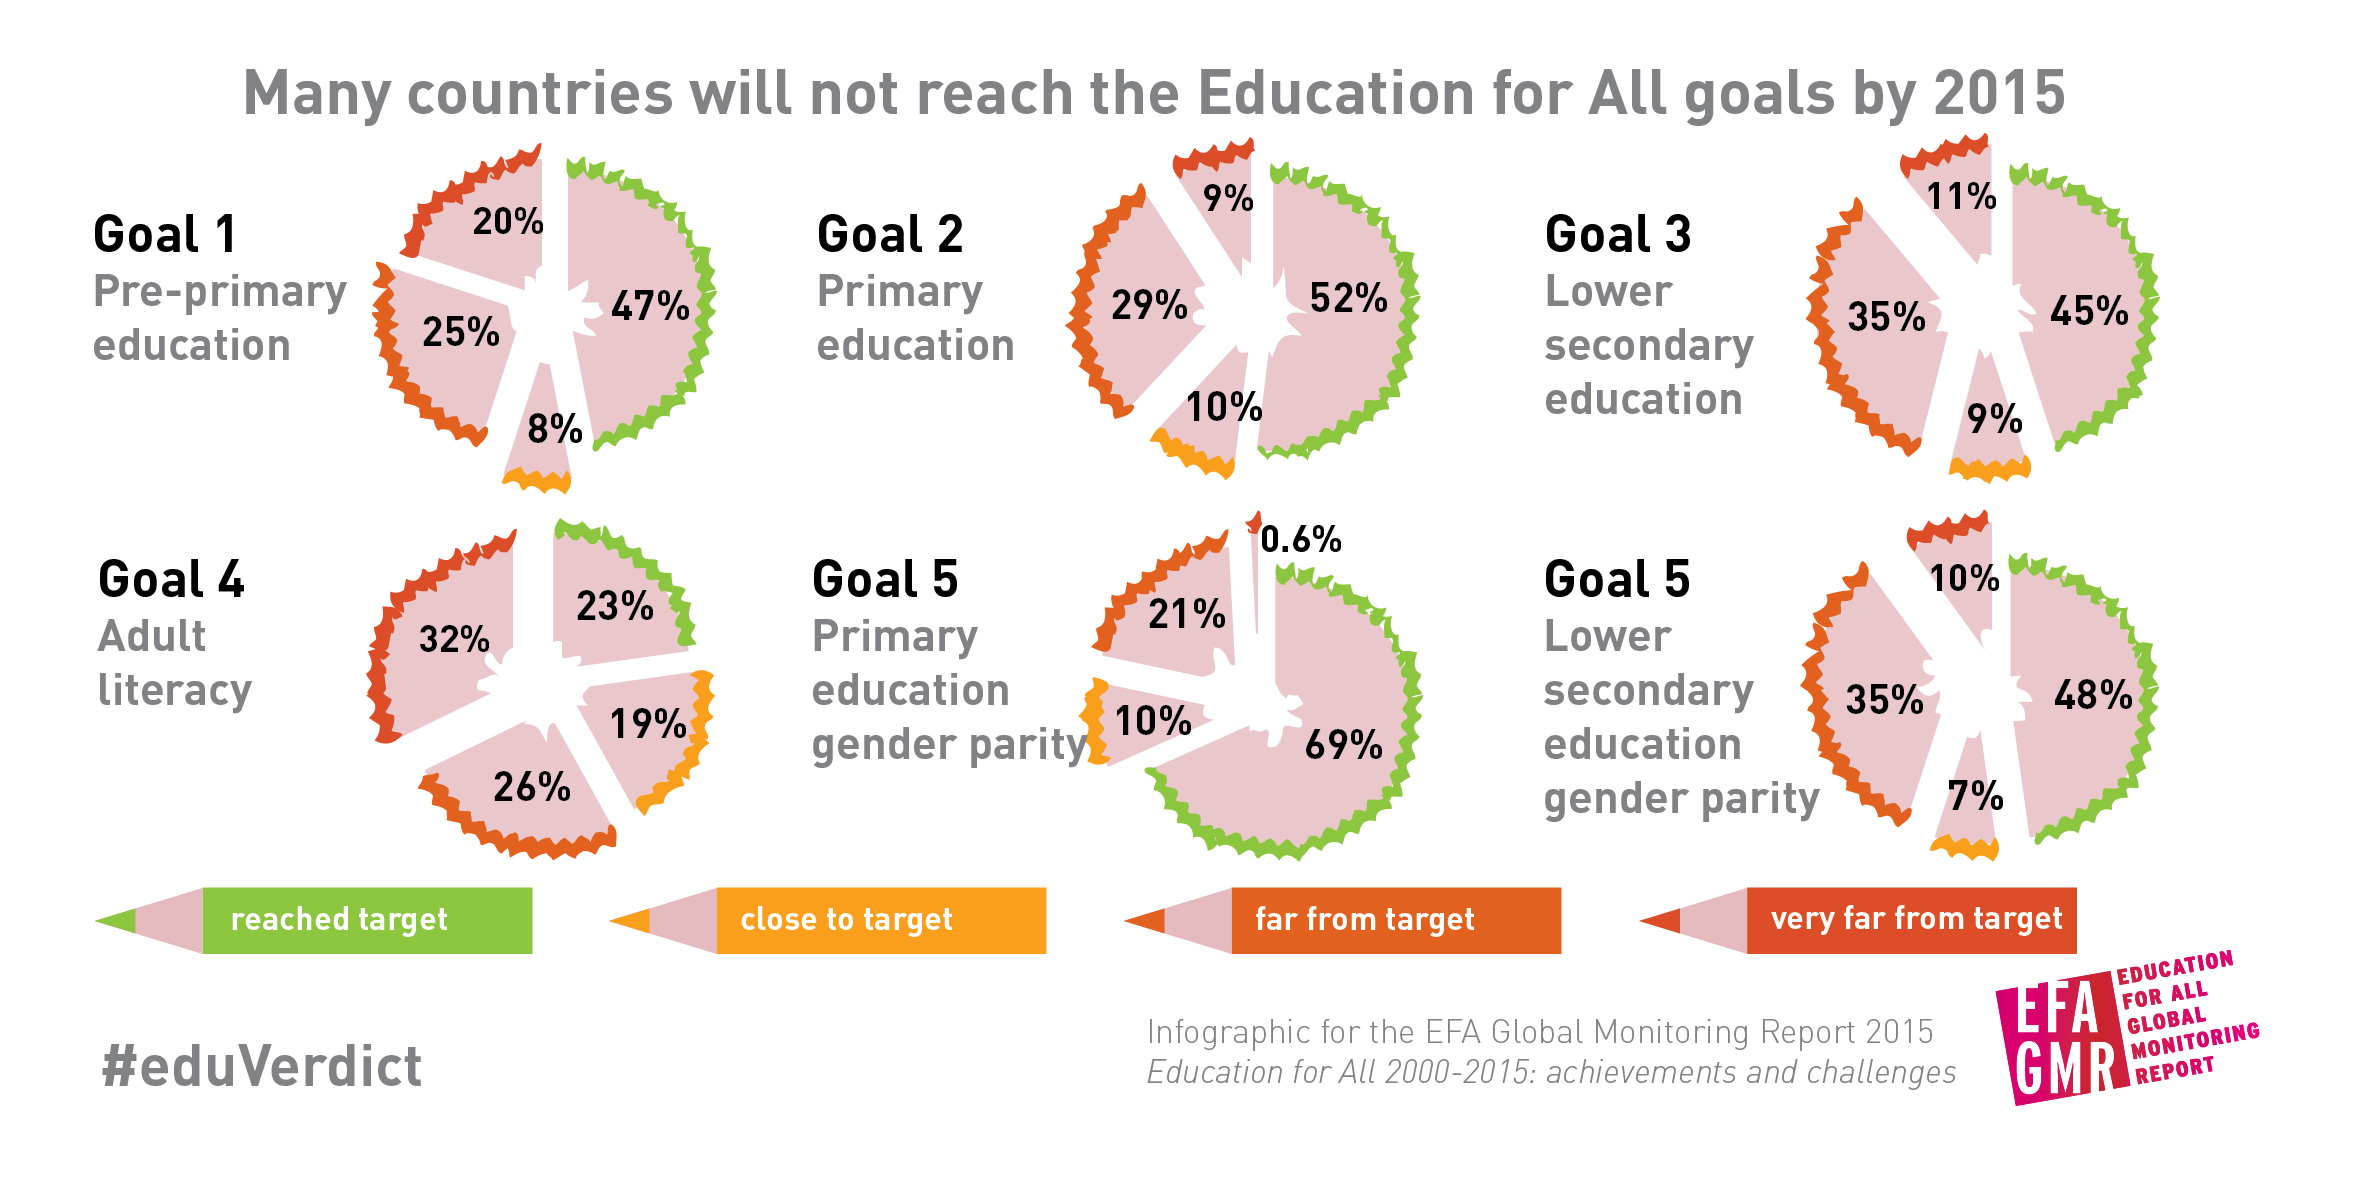 Many countries will not reach the Education for All goals by 2015